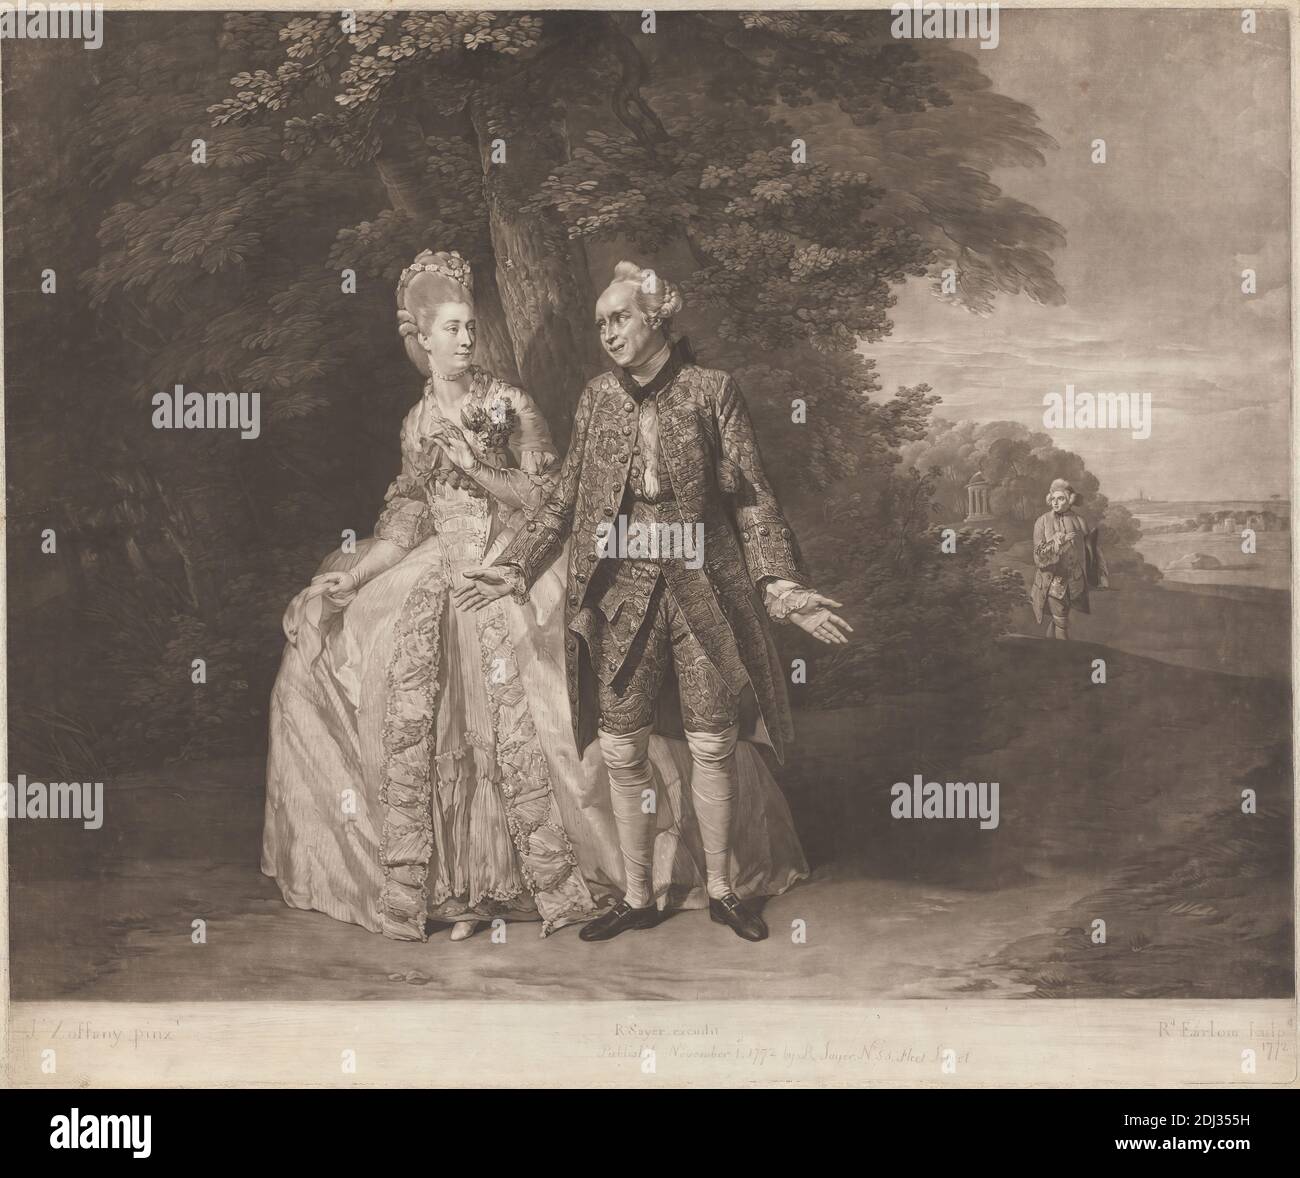 Thomas King and Sophia Baddely in 'The Clandestine Marriage', Richard Earlom, 1743–1822, British, after Johan Joseph Zoffany RA, 1733–1810, German, active in Britain (from 1760), Published by Robert Sayer, 1725–1794, British, 1772, Mezzotint on medium, slightly textured, cream laid paper, Sheet: 18 3/4 x 22 5/8 inches (47.6 x 57.5 cm), Plate: 18 1/4 x 21 7/8 inches (46.4 x 55.6 cm), and Image: 16 7/8 x 21 7/8 inches (42.9 x 55.6 cm), actors, actress, brocade, coat, corsage, dress, gesture, gown, hat, kerchief, landscape, literary theme, marriage, men, play, plays by George Colman the elder ( Stock Photo